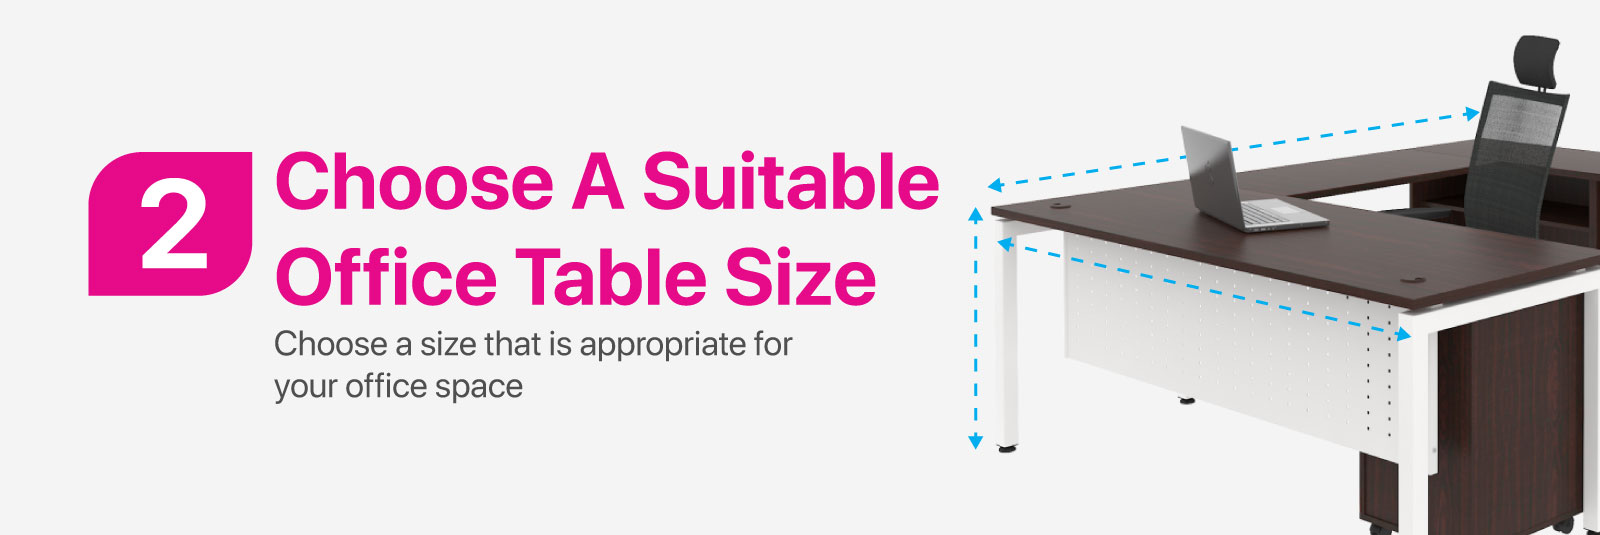 Choose A Suitable Office Table Size - Choose a size that is appropriate for your office space